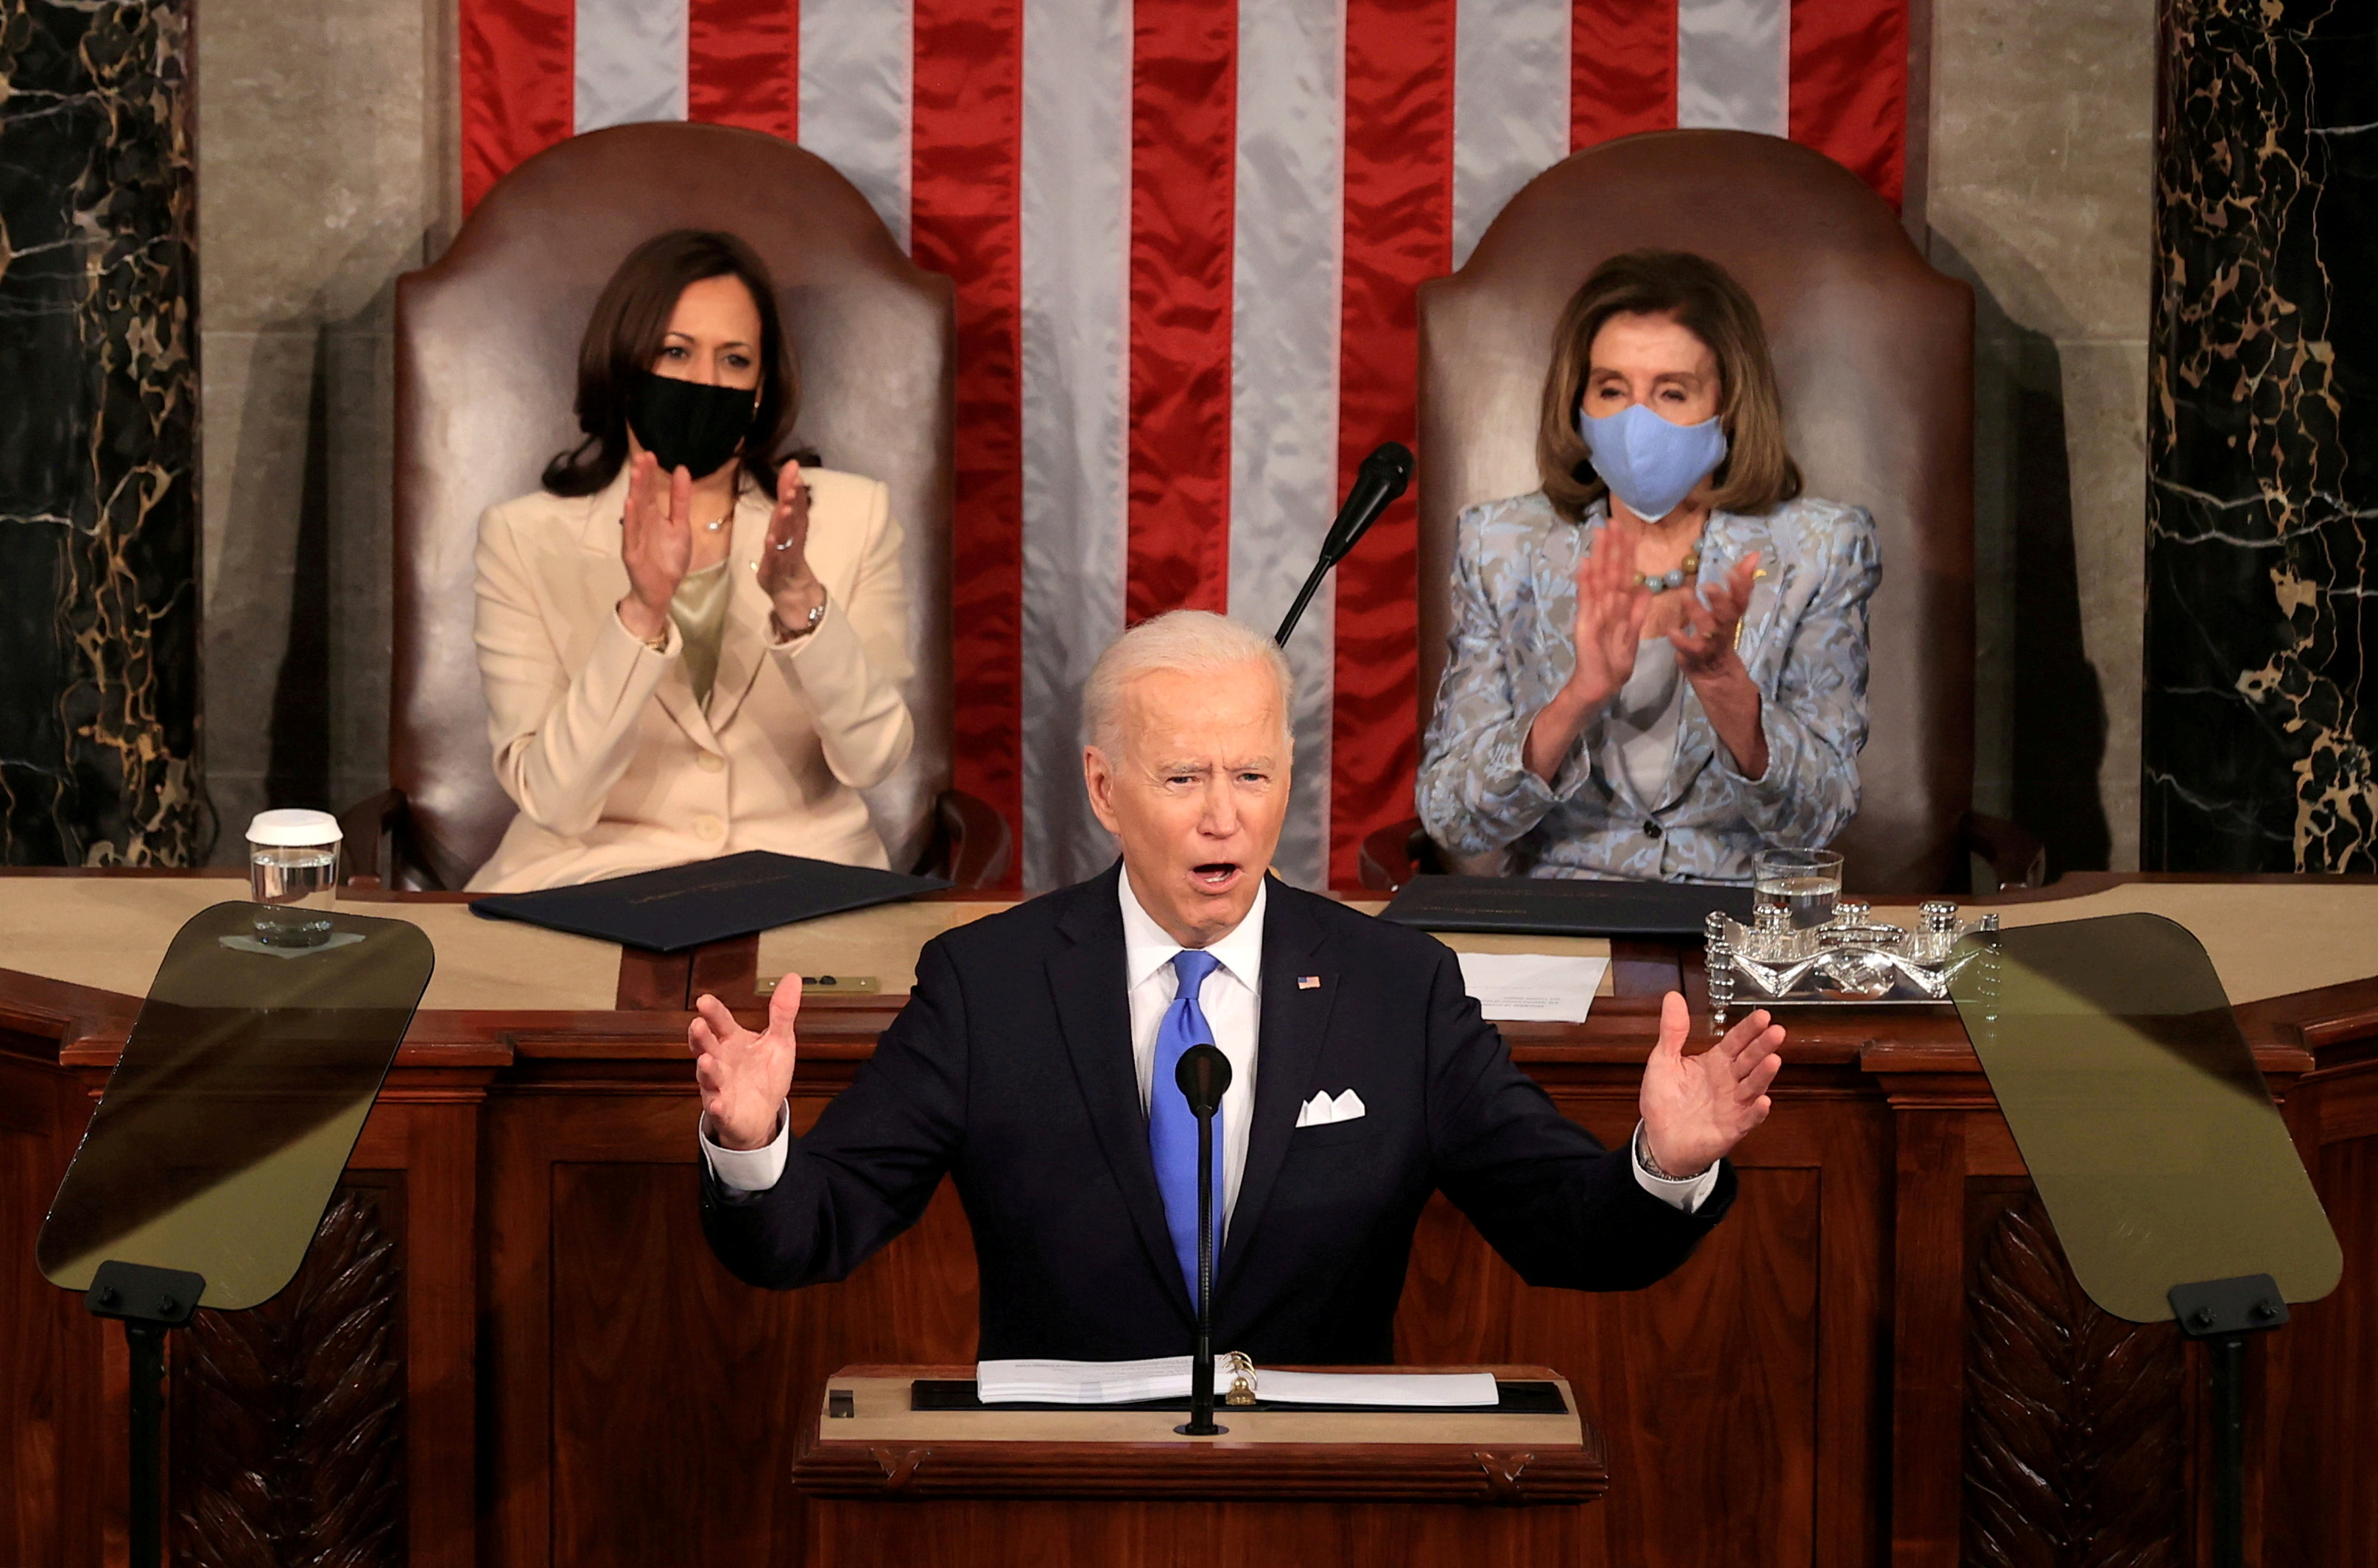 U.S. President Joe Biden's first address to a joint session of the U.S. Congress in Washington